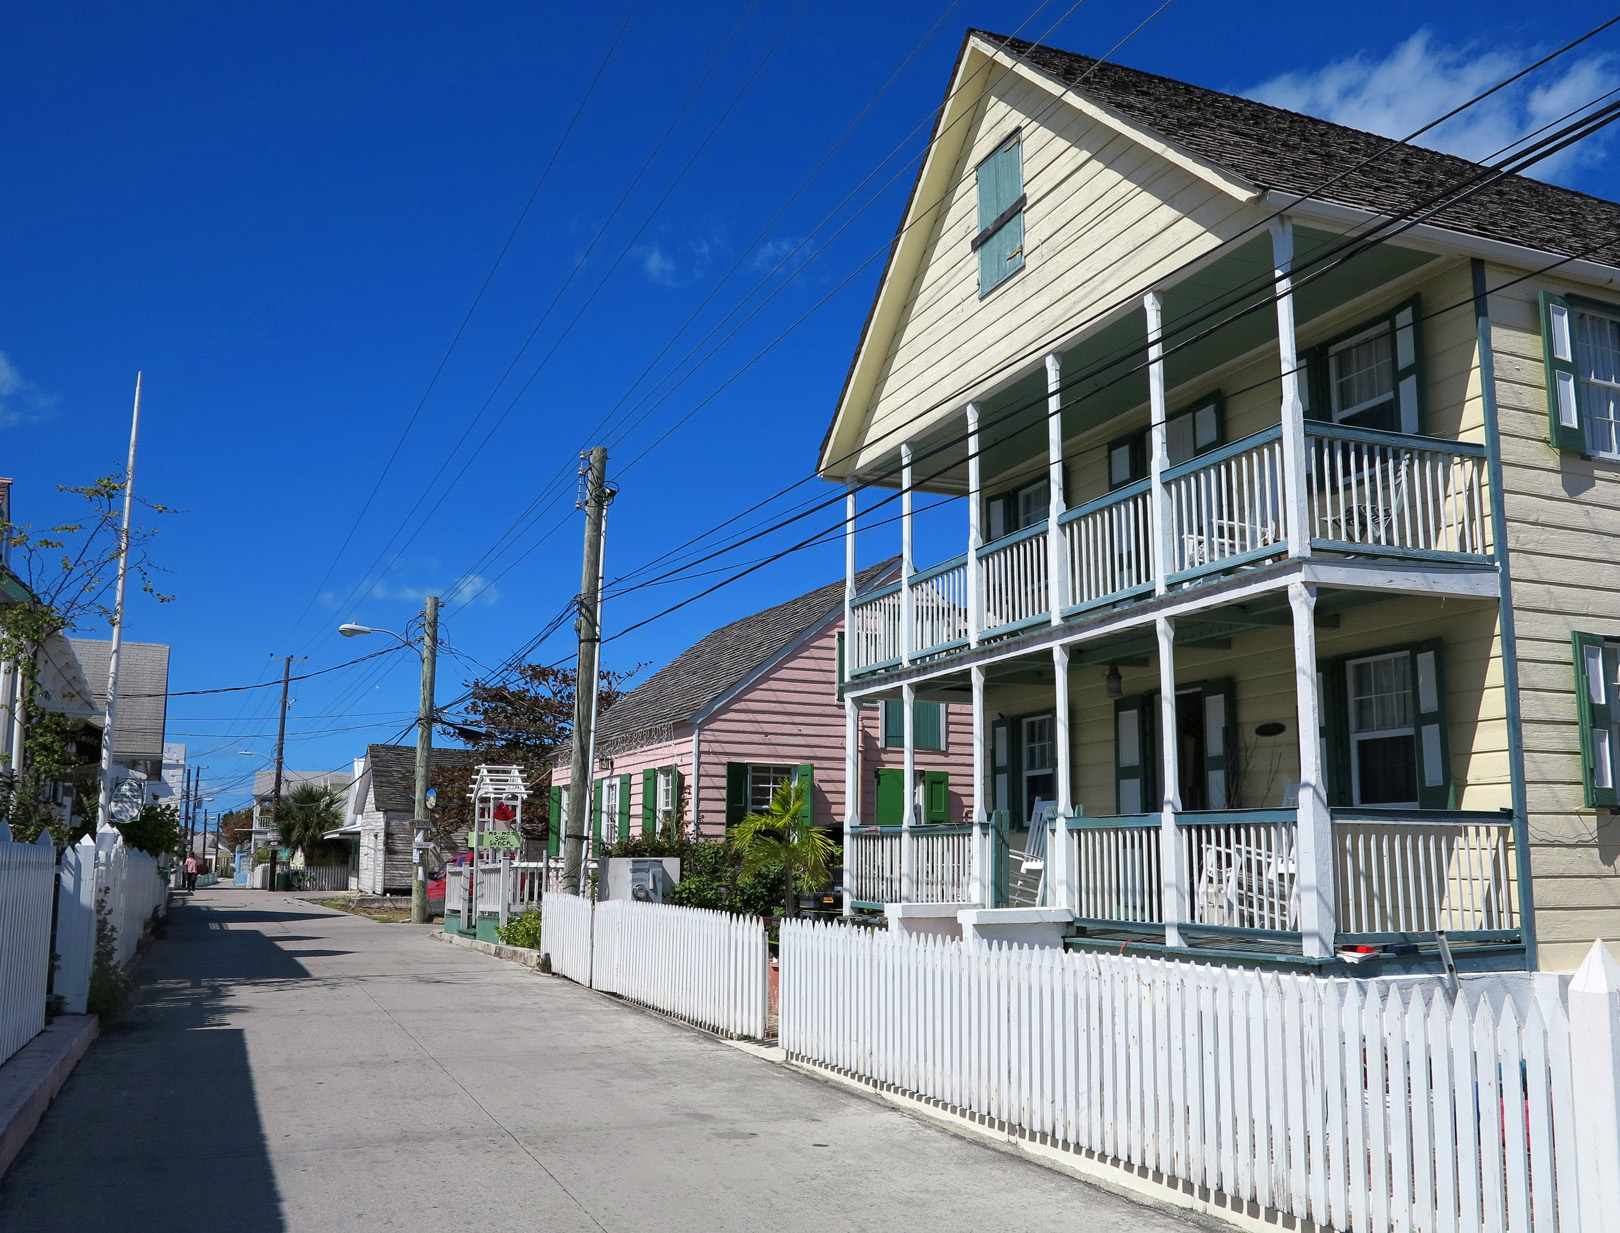 Street scene in New Plymouth, Green Turtle Cay, Abaco, Bahamas